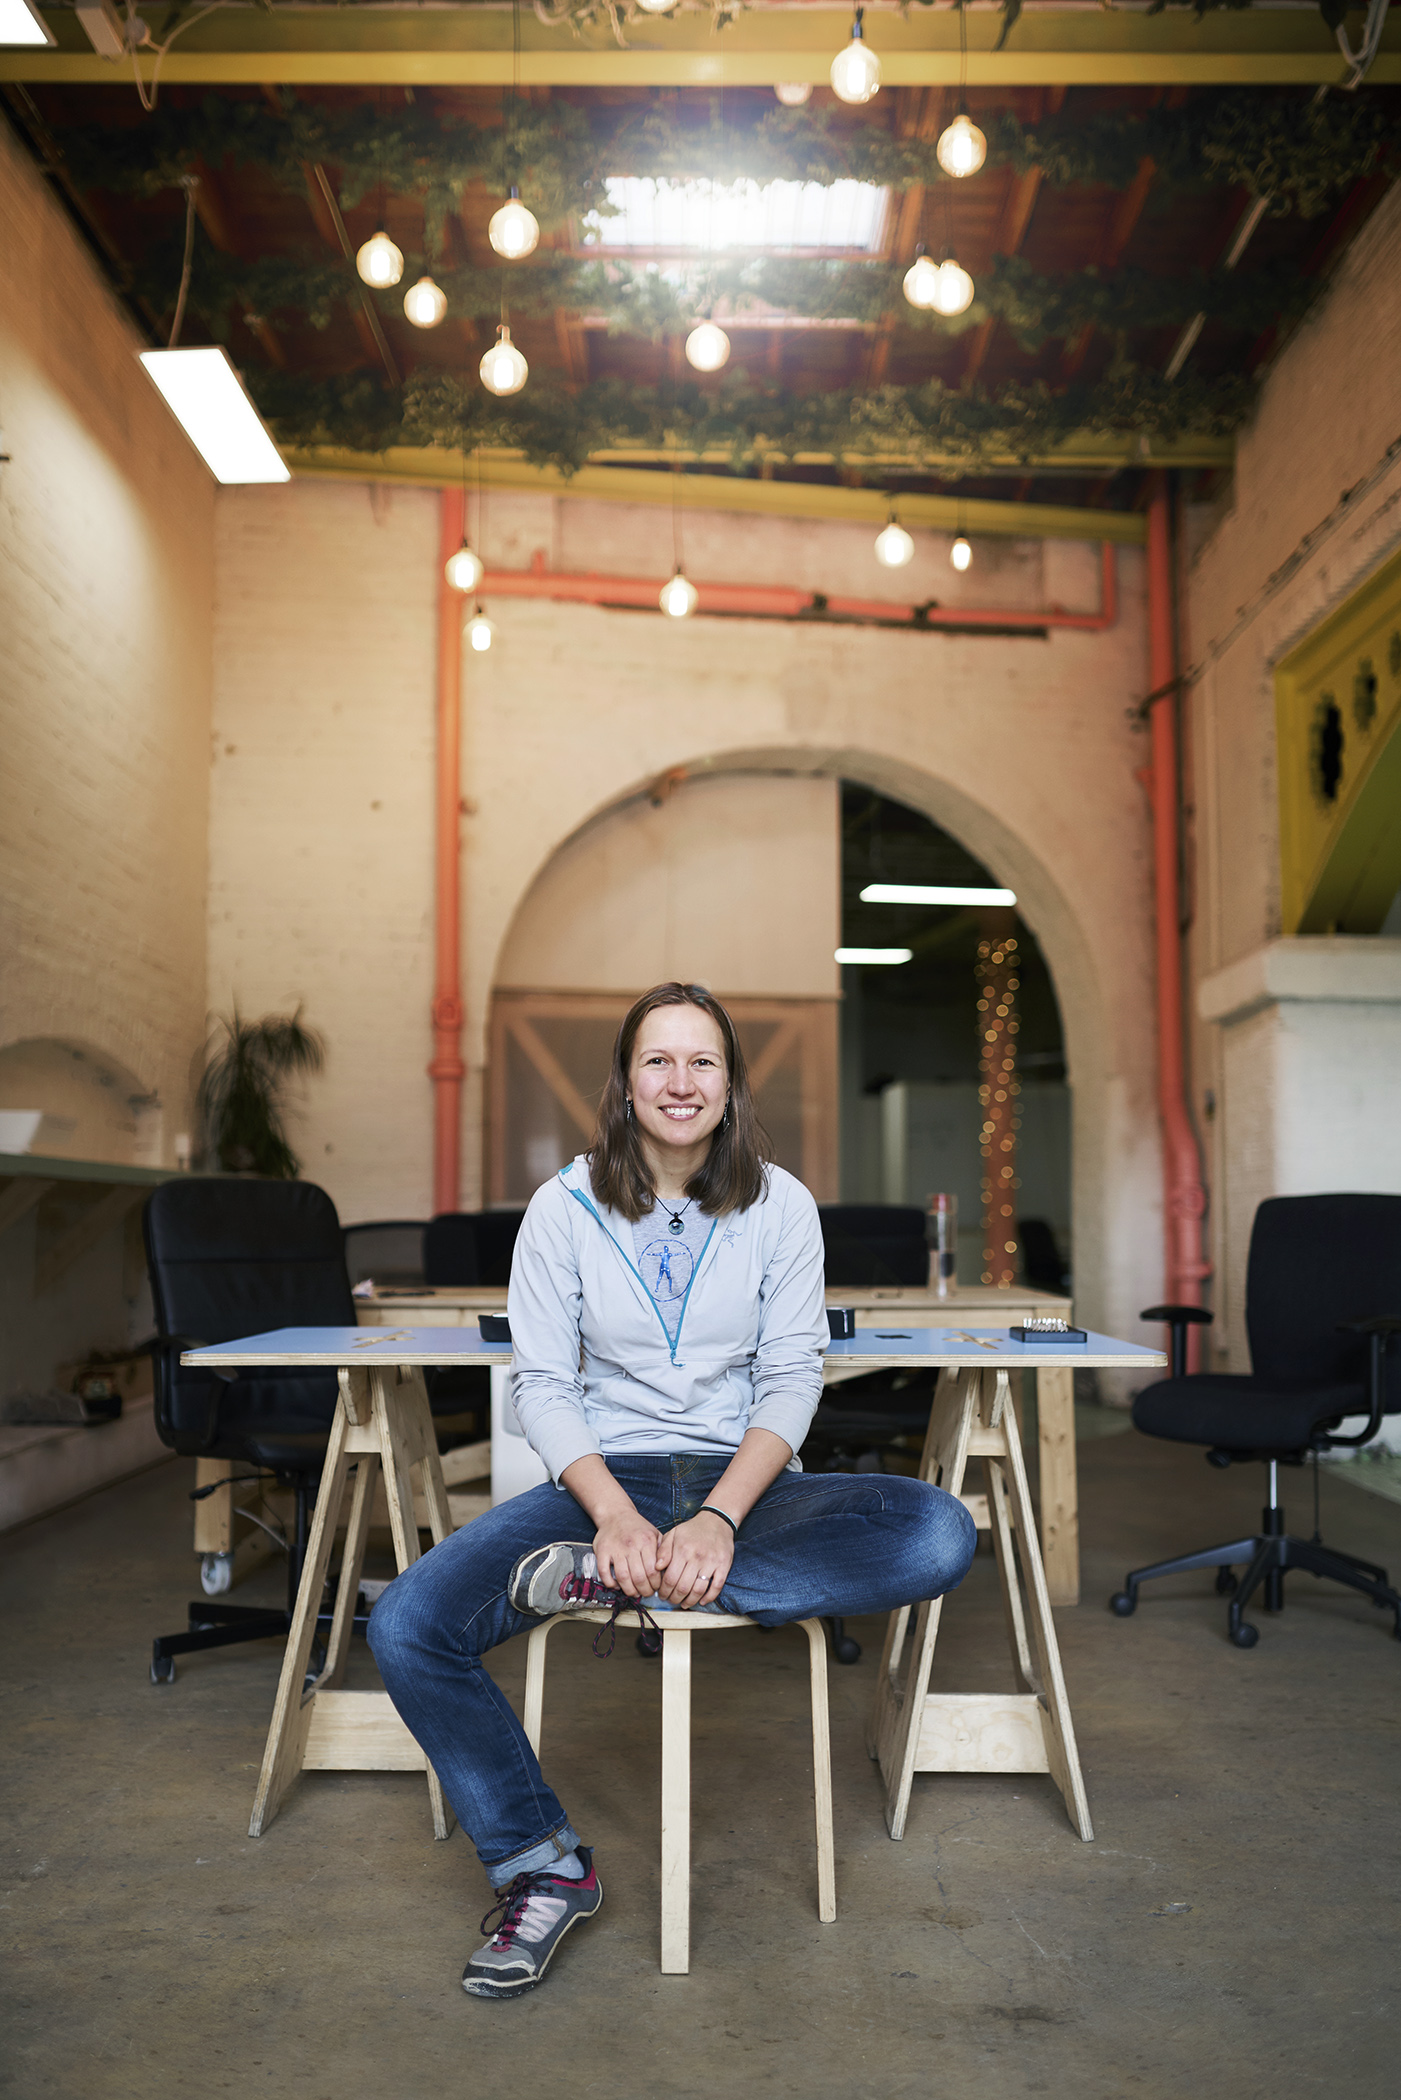 Women In Innovation winner Alex Haslehurst, founder of Vitrue Health, photographed at their offices in the Camden Collective in London, 10 February 2019. Photo by Bristol photographer Adam Gasson / adamgasson.com